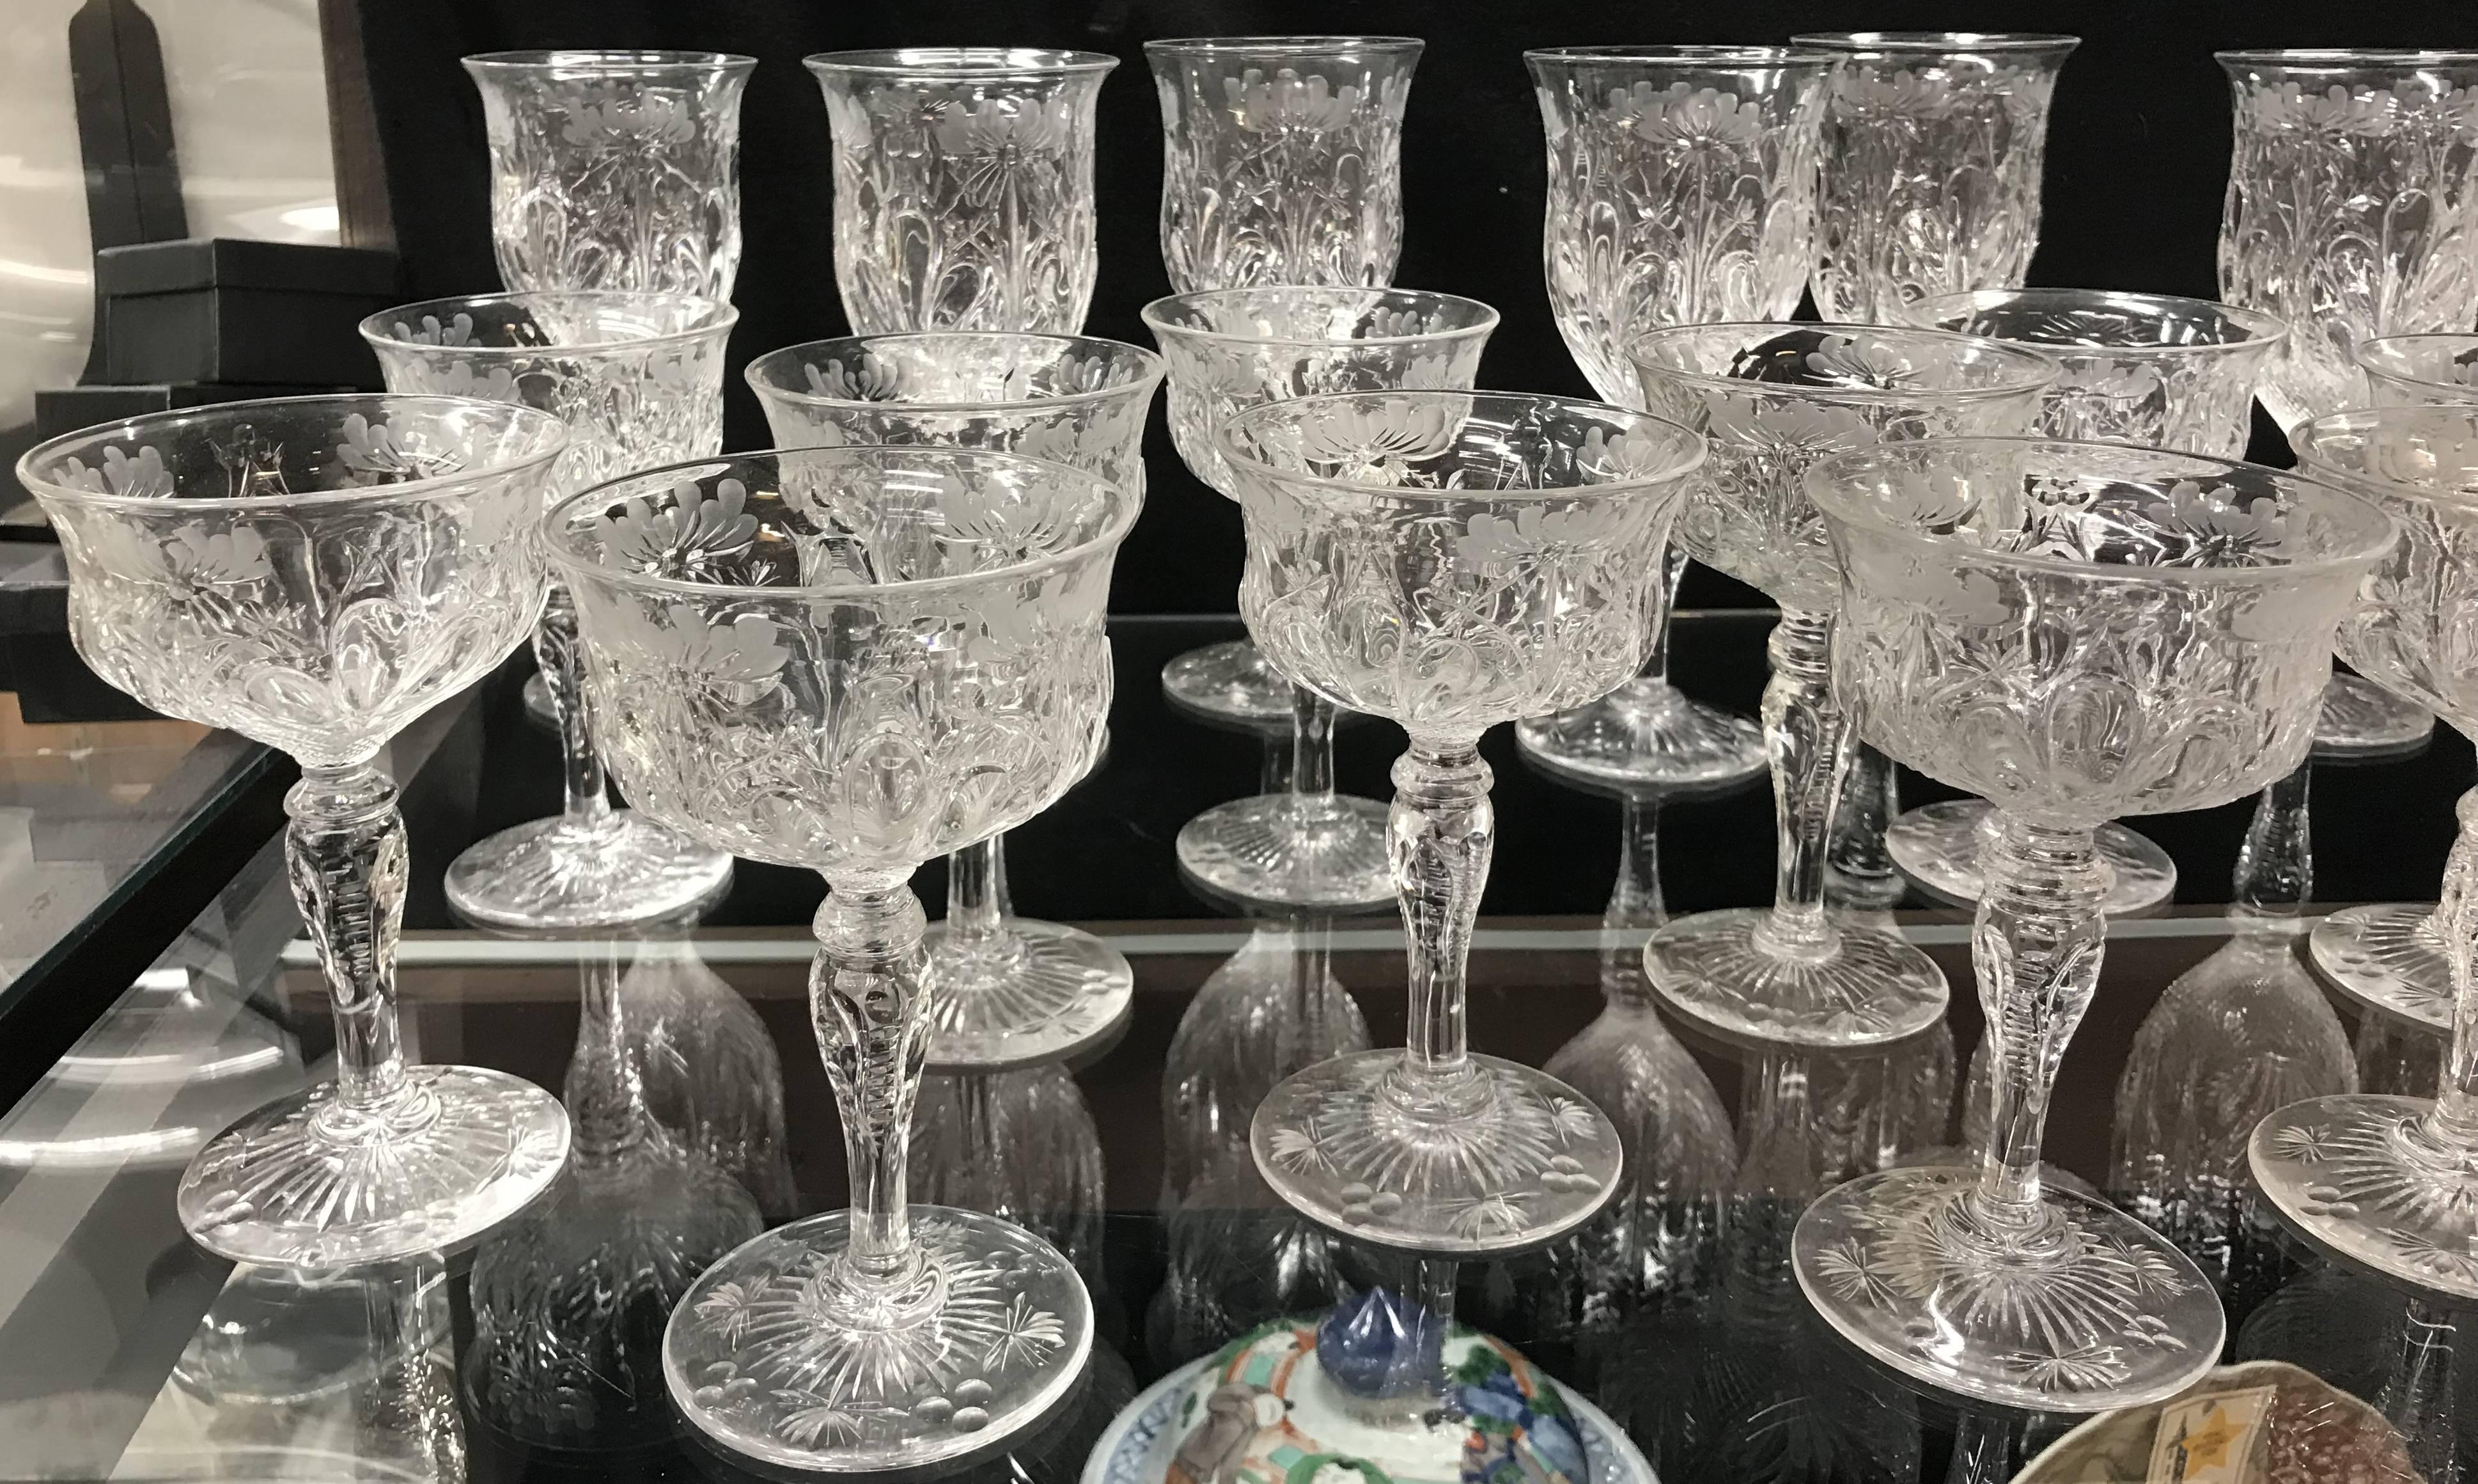 An exceptional quality cut glass stemware set, including 11 water goblets, 11 champagnes, 10 sherries, and 10 cordials, all cut and wheel etched with foliate designs and latticework. Set dates to the 20th century in excellent overall condition with